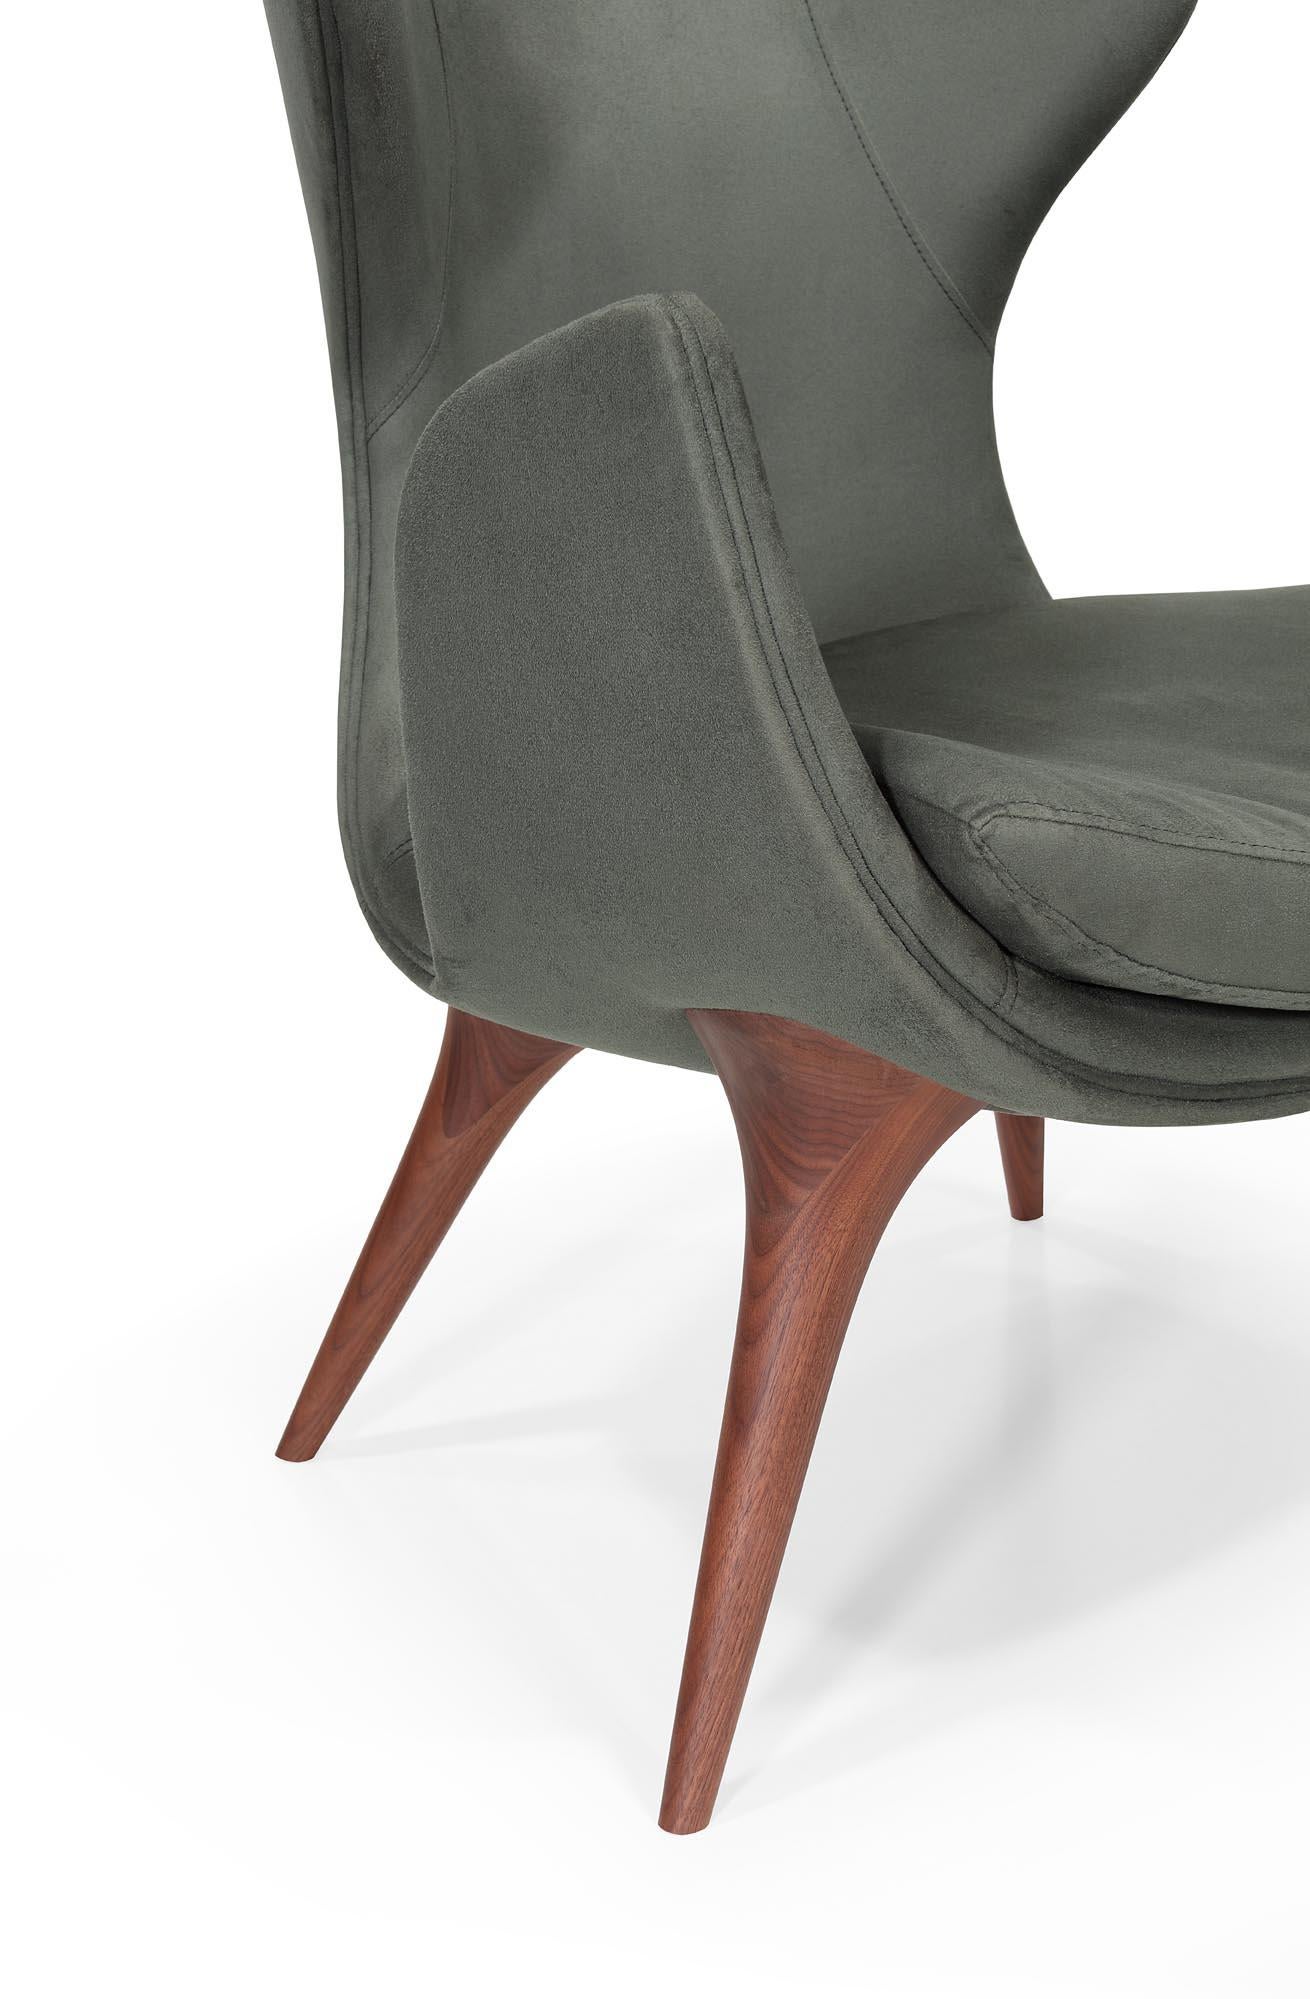 A true statement of luxury
Combining the finest and ancient craftsmanship with luxurious levels of design, quality, and comfort. 

Korcula Armchair, Modern Collection, Walnut Wood, Suede Fabric - Traditional Handcrafted in Portugal 

It is made